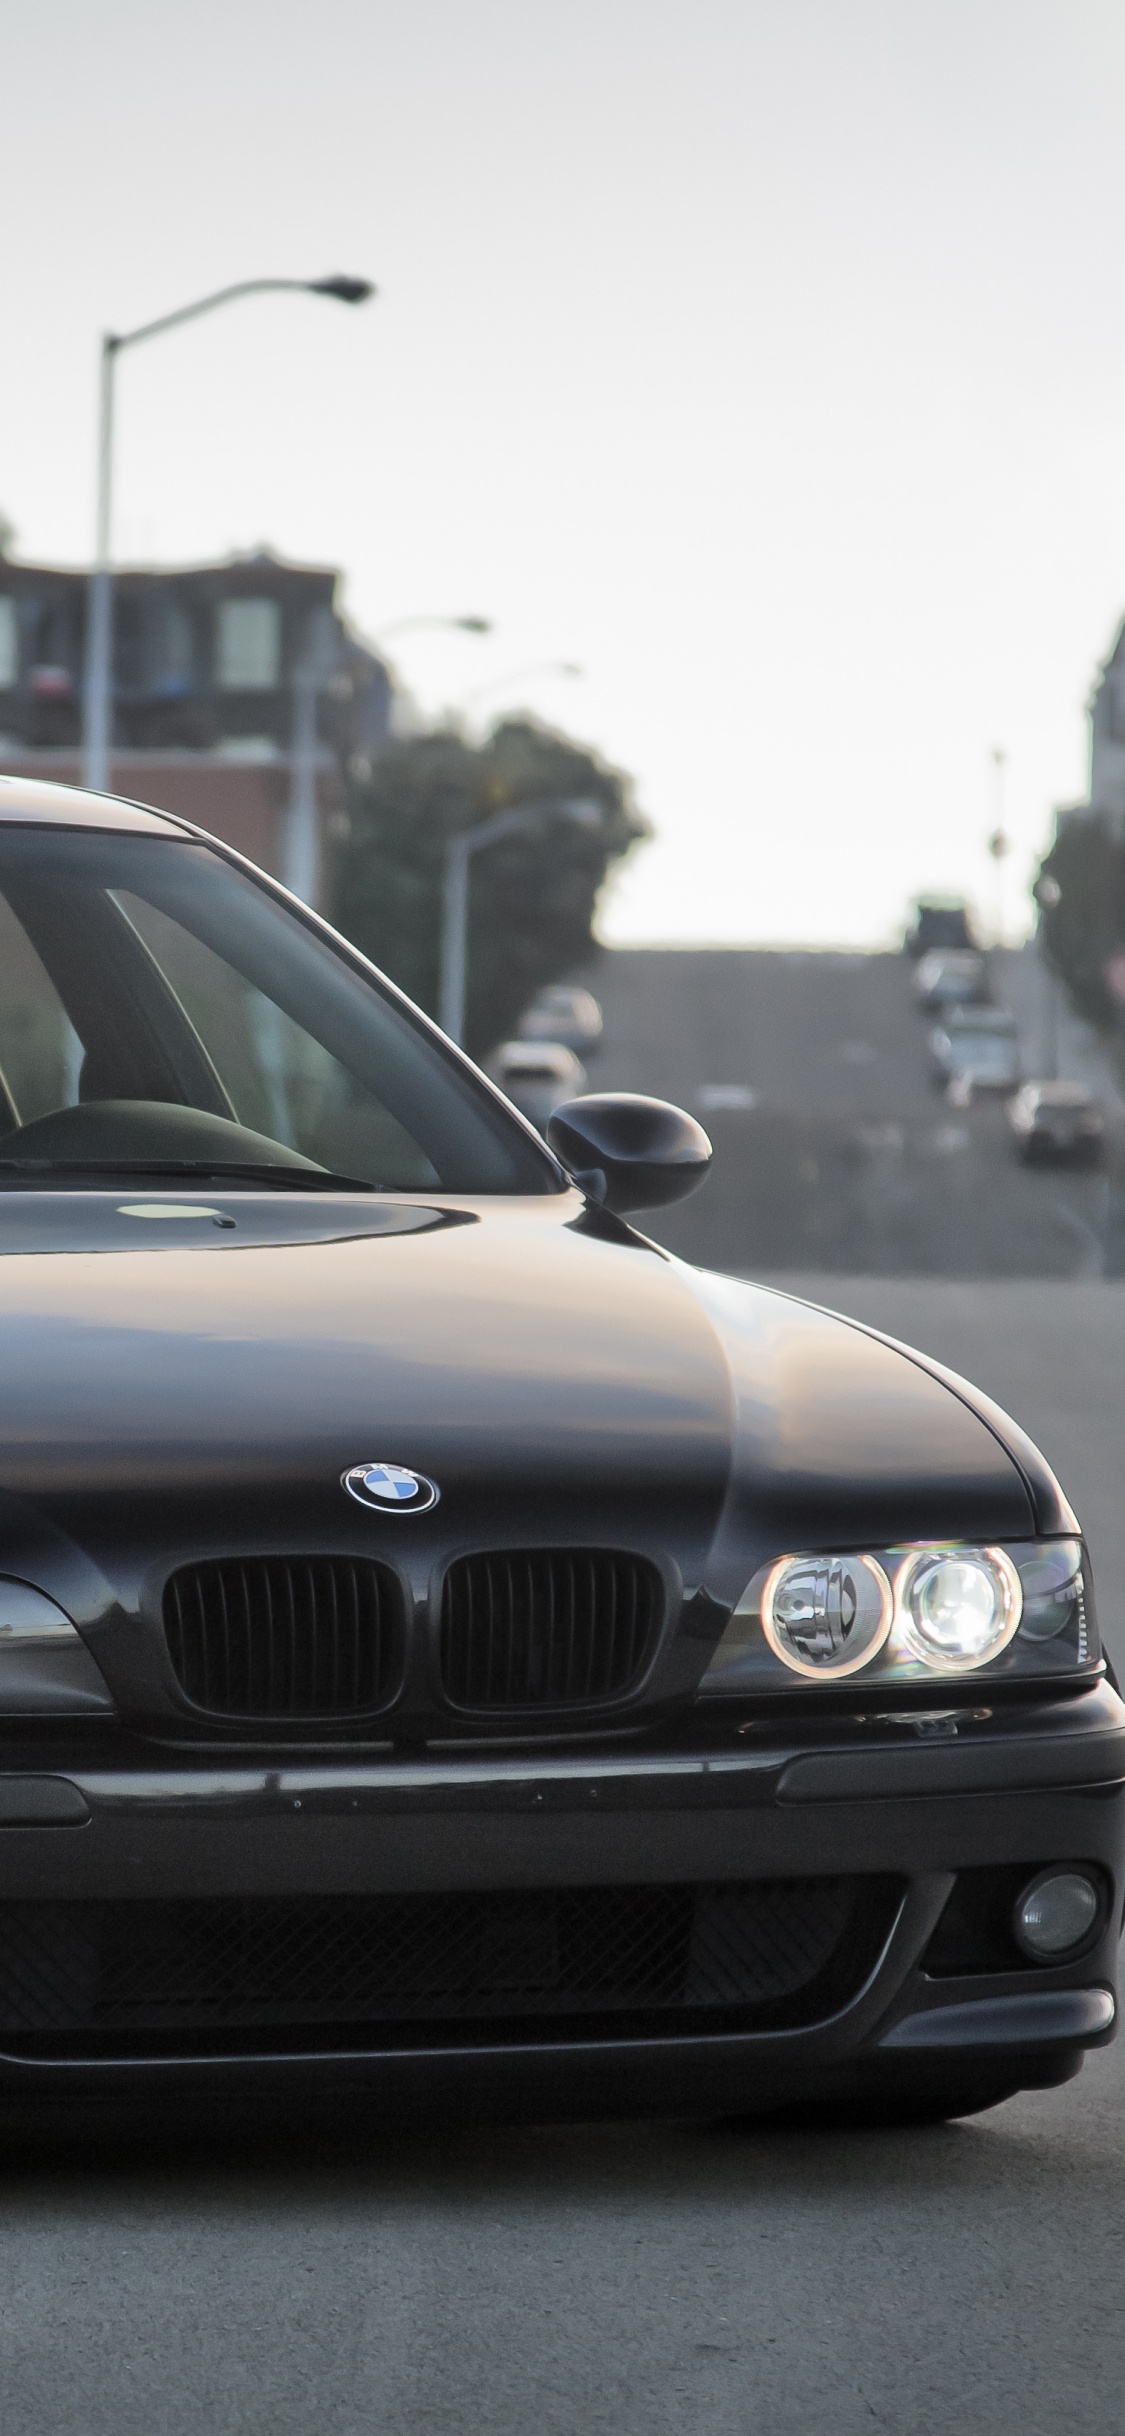 Black Bmw m 3 on Road During Daytime. Wallpaper in 1125x2436 Resolution